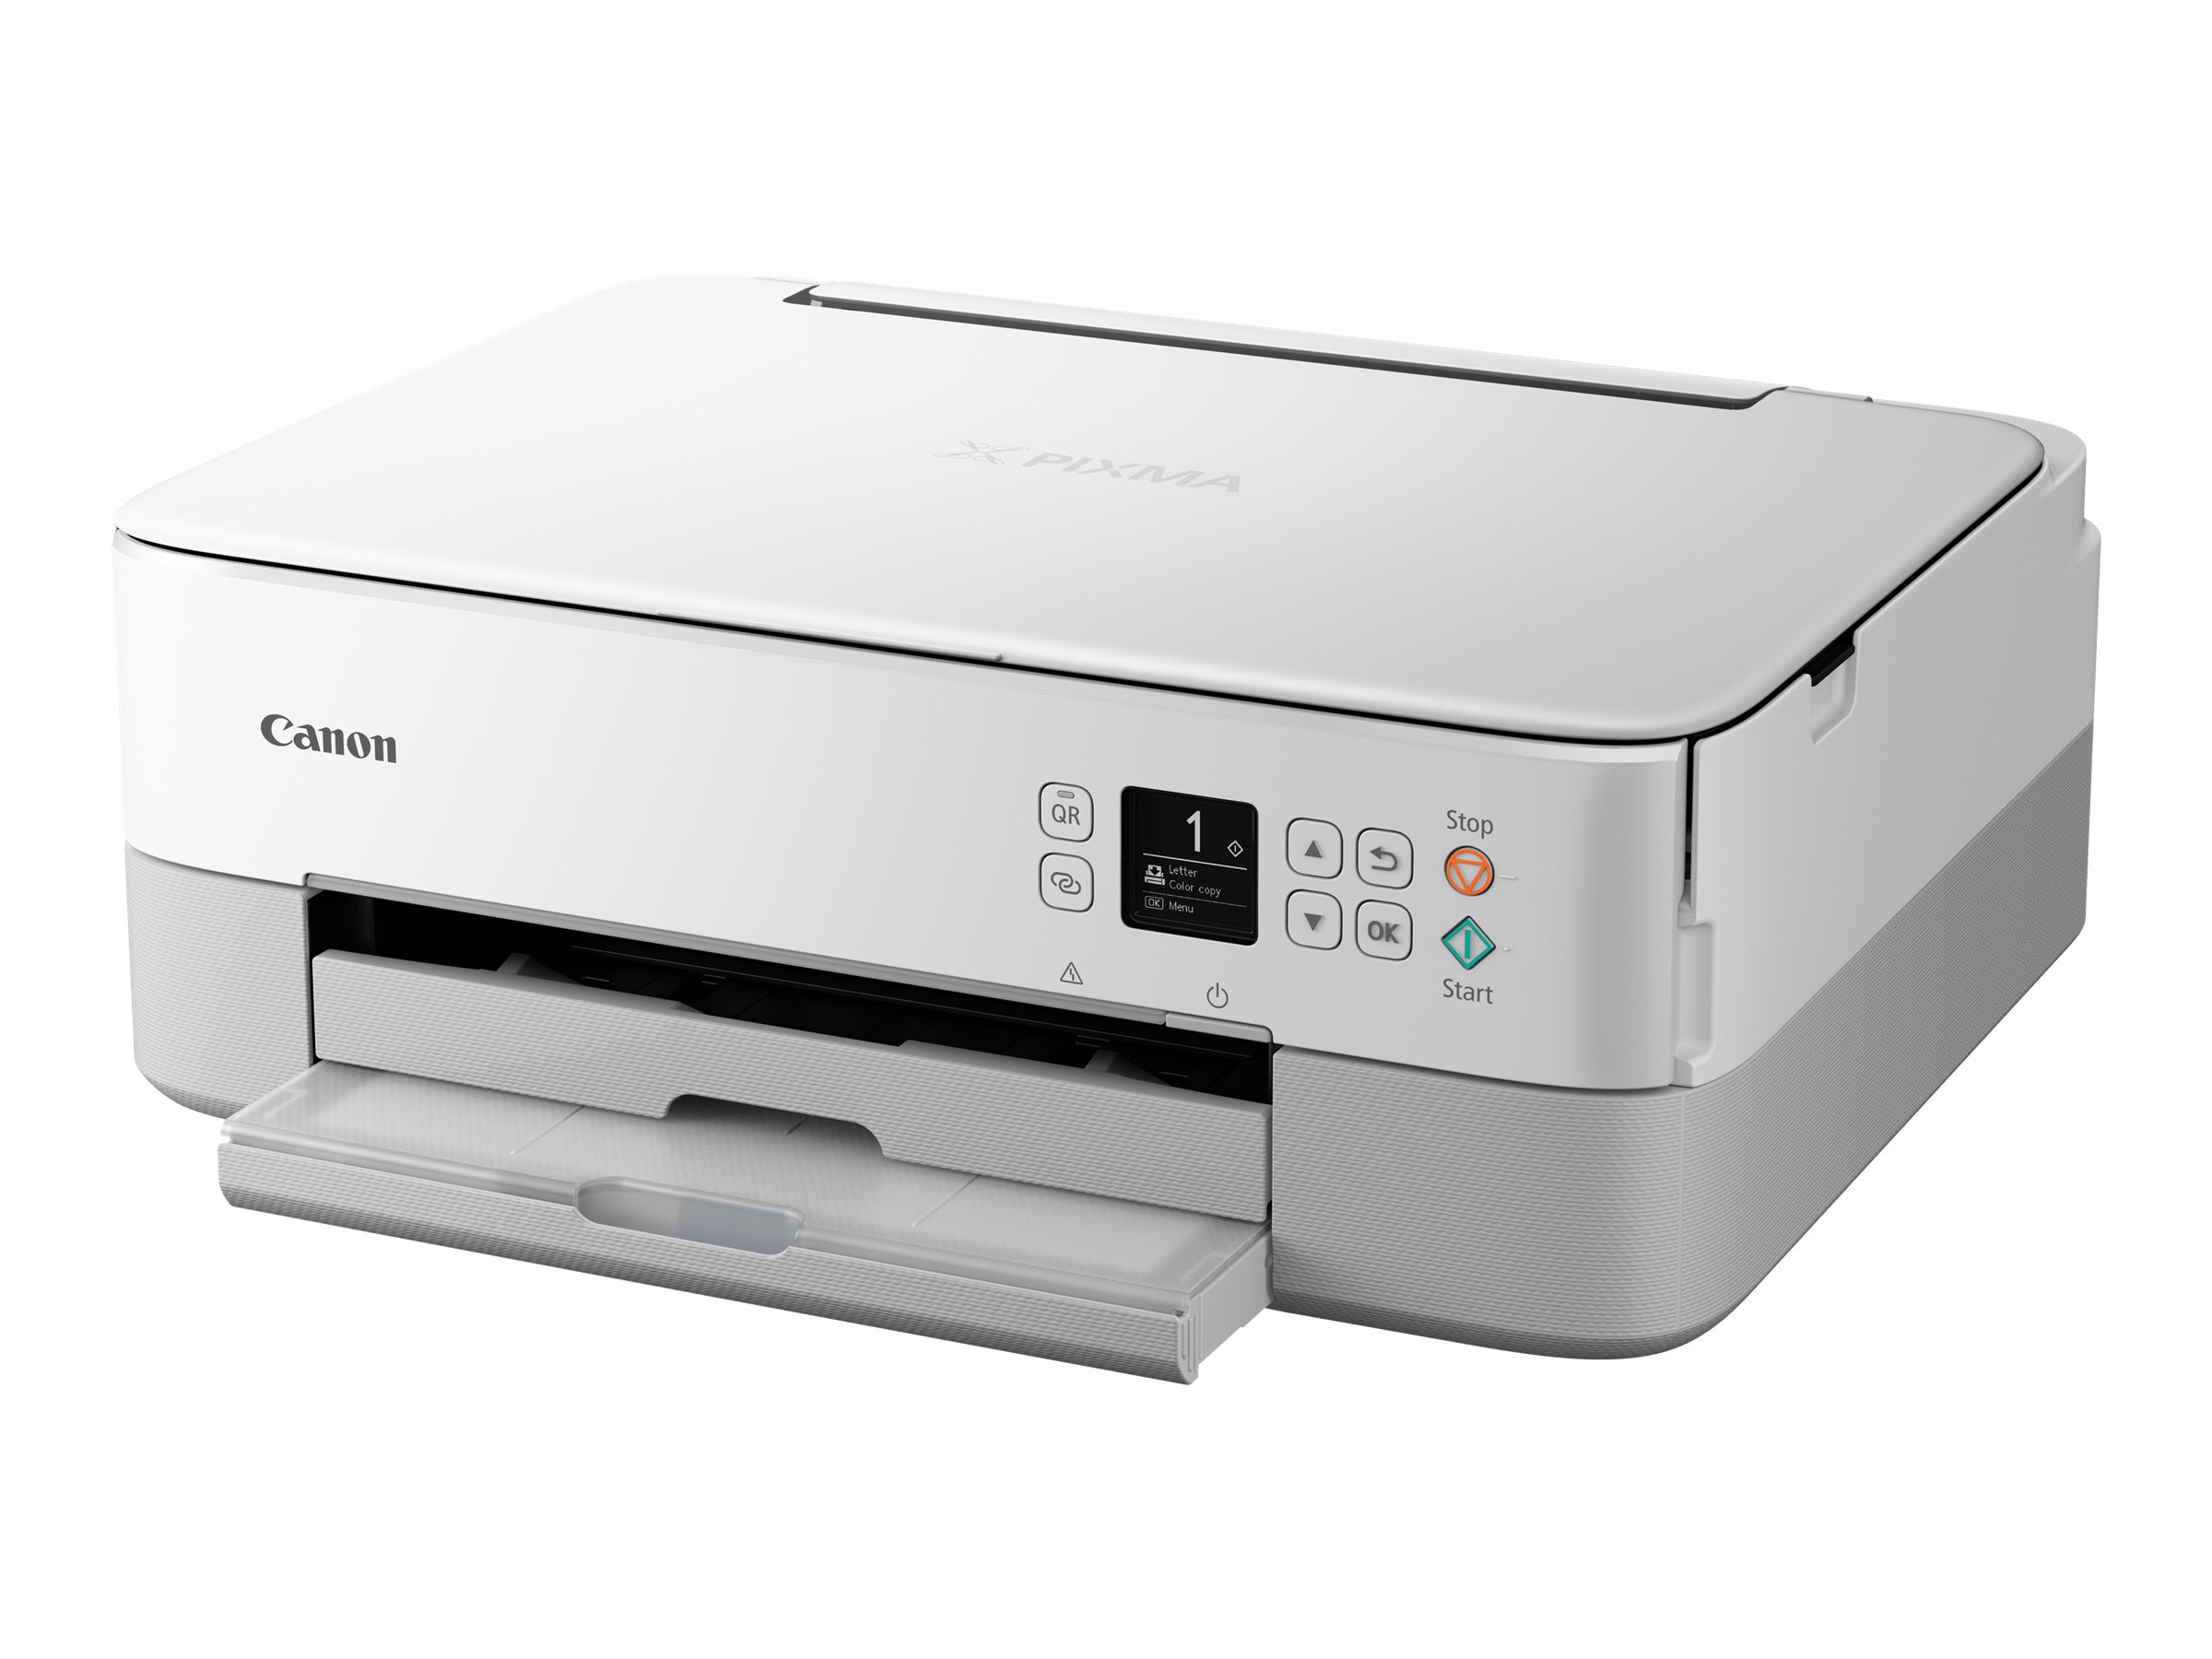 als resultaat ginder Malaise Canon PIXMA TS6420a - Multifunction printer | www.shi.com